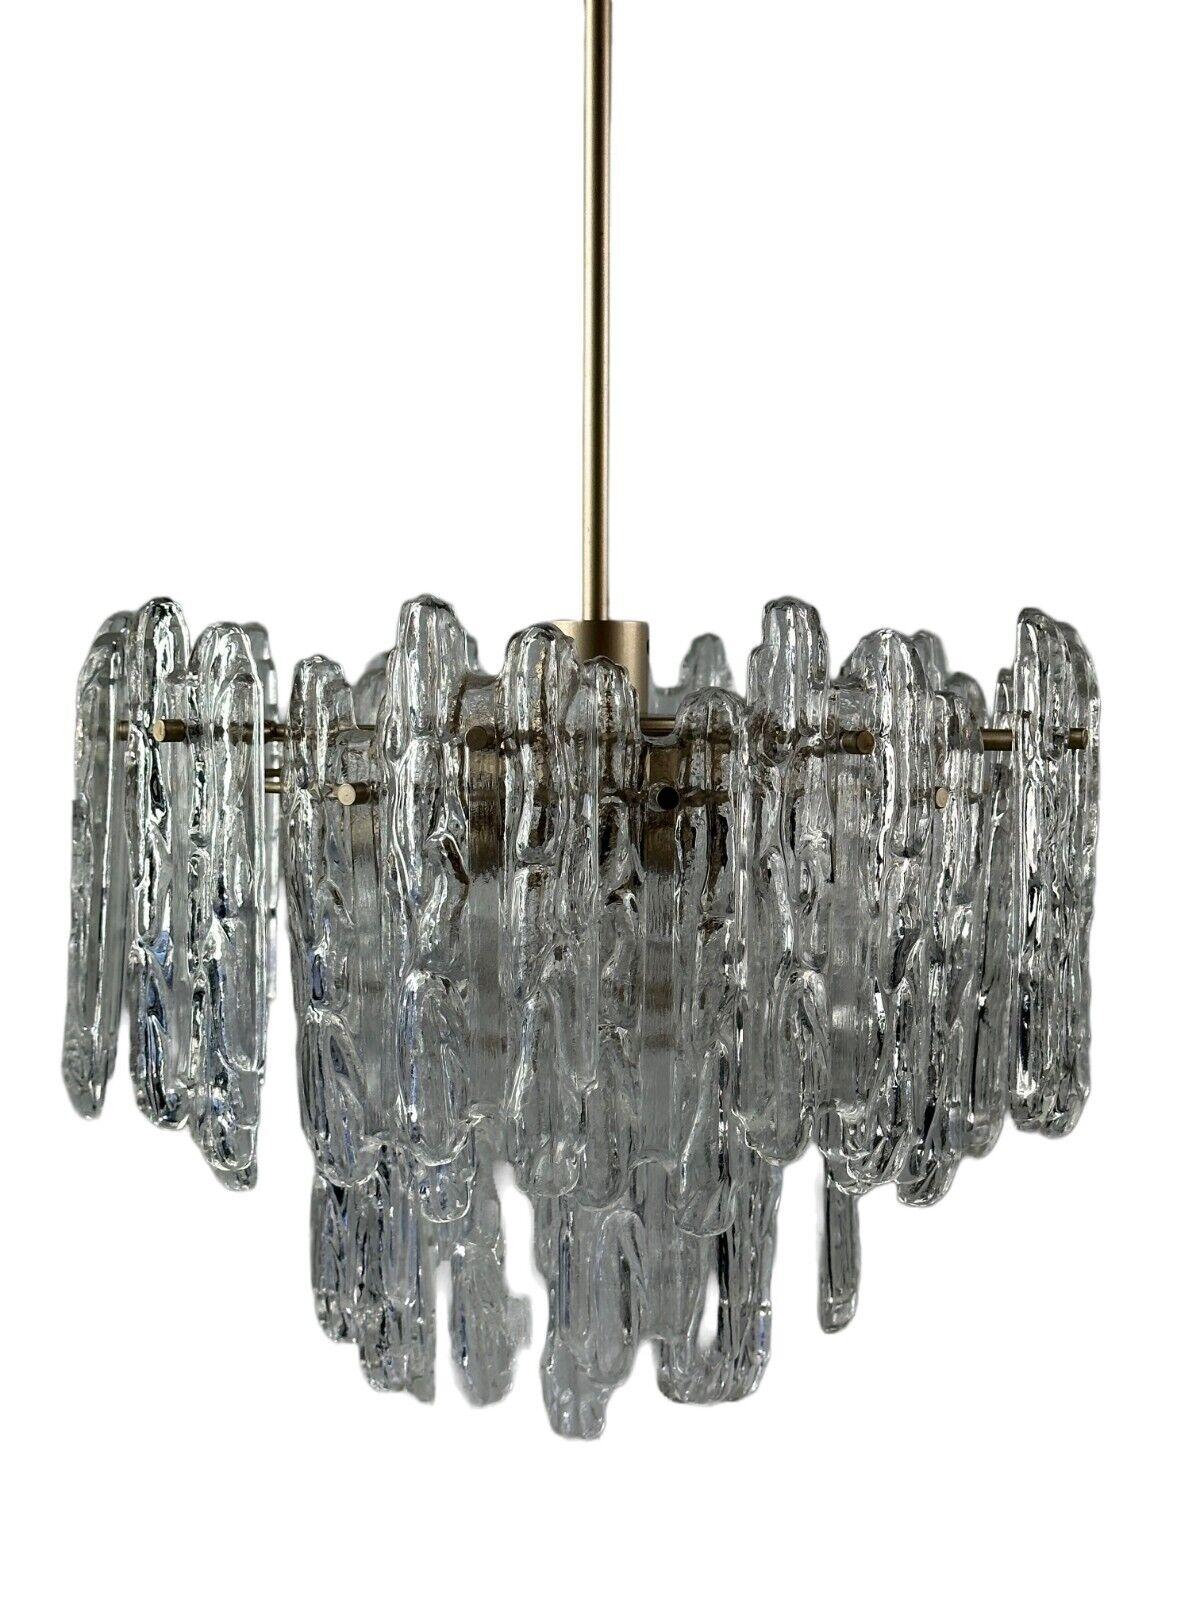 60s 70s ceiling lamp chandelier Kinkeldey Germany Space Age glass design

Object: chandelier

Manufacturer: Kinkeldey

Condition: good

Age: around 1960-1970

Dimensions:

Diameter = 42cm
Height = 70cm

Material: glass, metal

Other notes:

1x E27